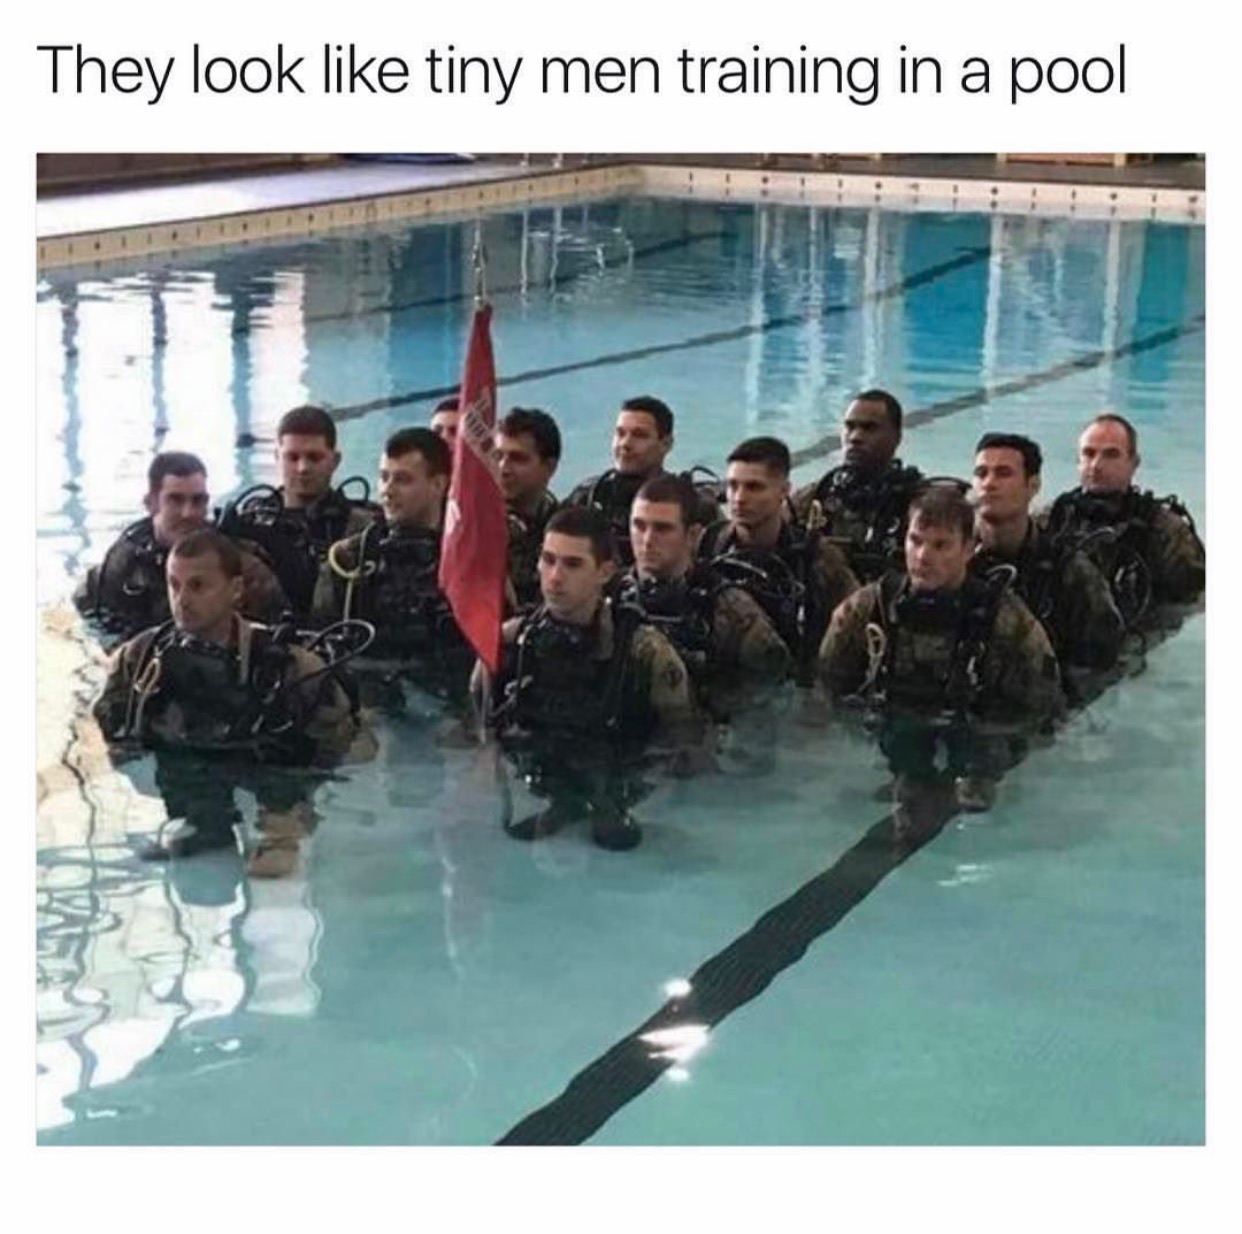 they look like tiny men training - They look tiny men training in a pool